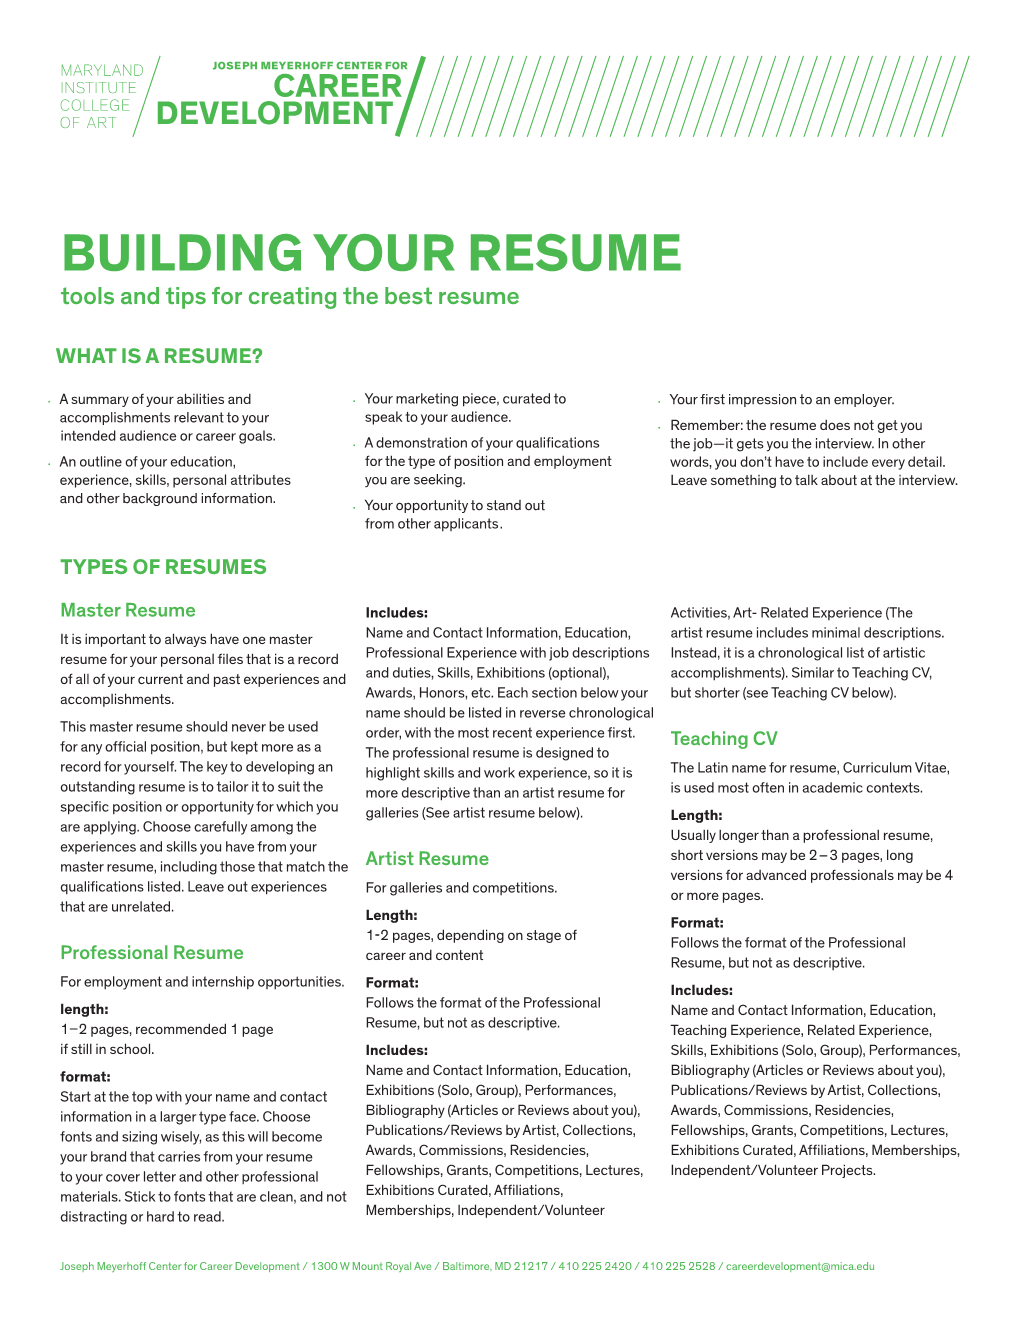 BUILDING YOUR RESUME Tools and Tips for Creating the Best Resume